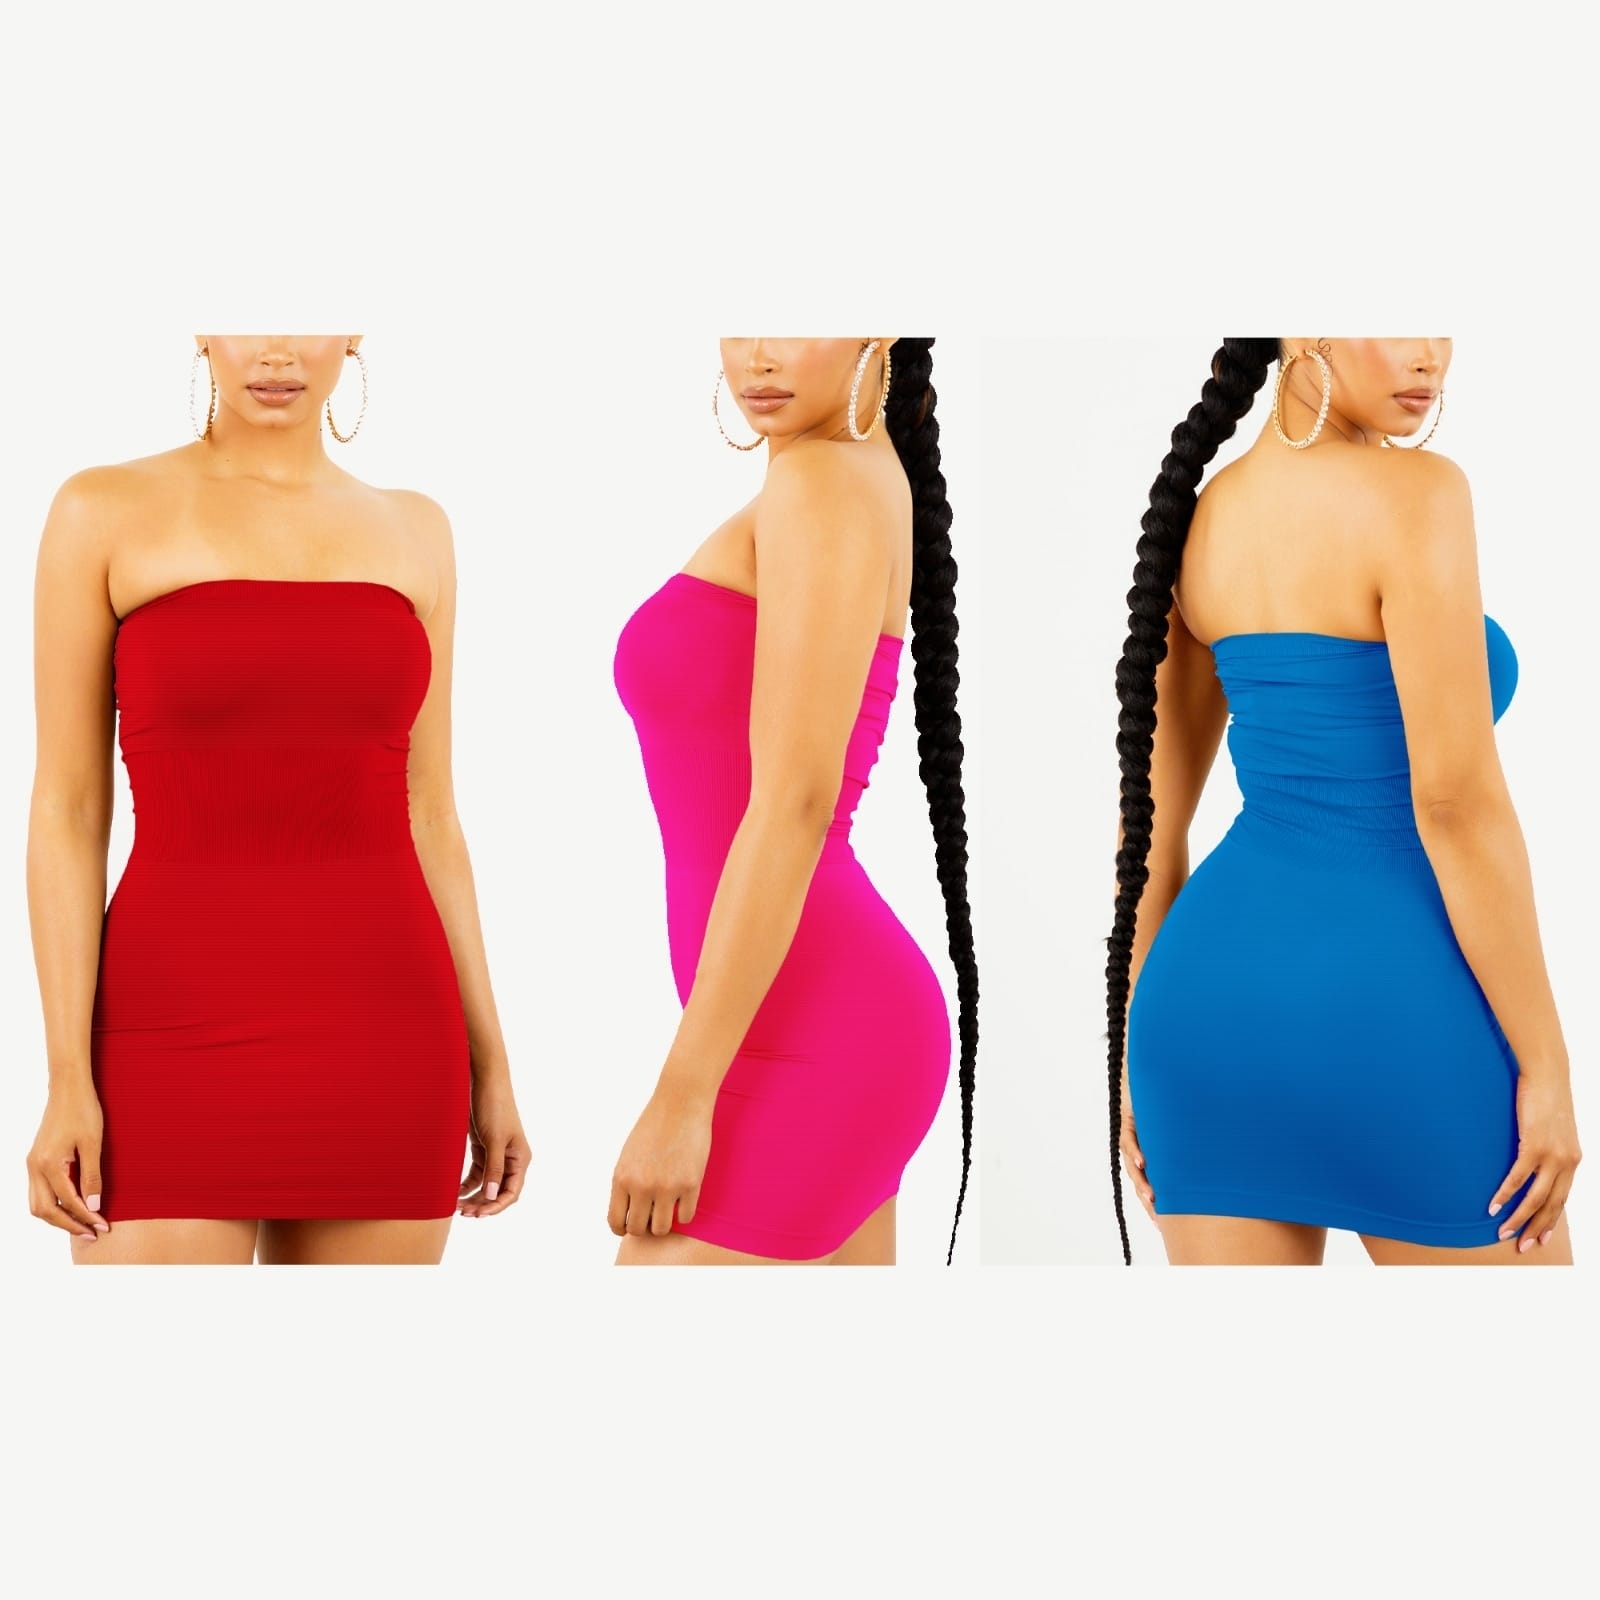 2-Pack Women's Strapless Stretchy Tight Fit Seamless Body Con Mini Tube Top Dress - PINK, L